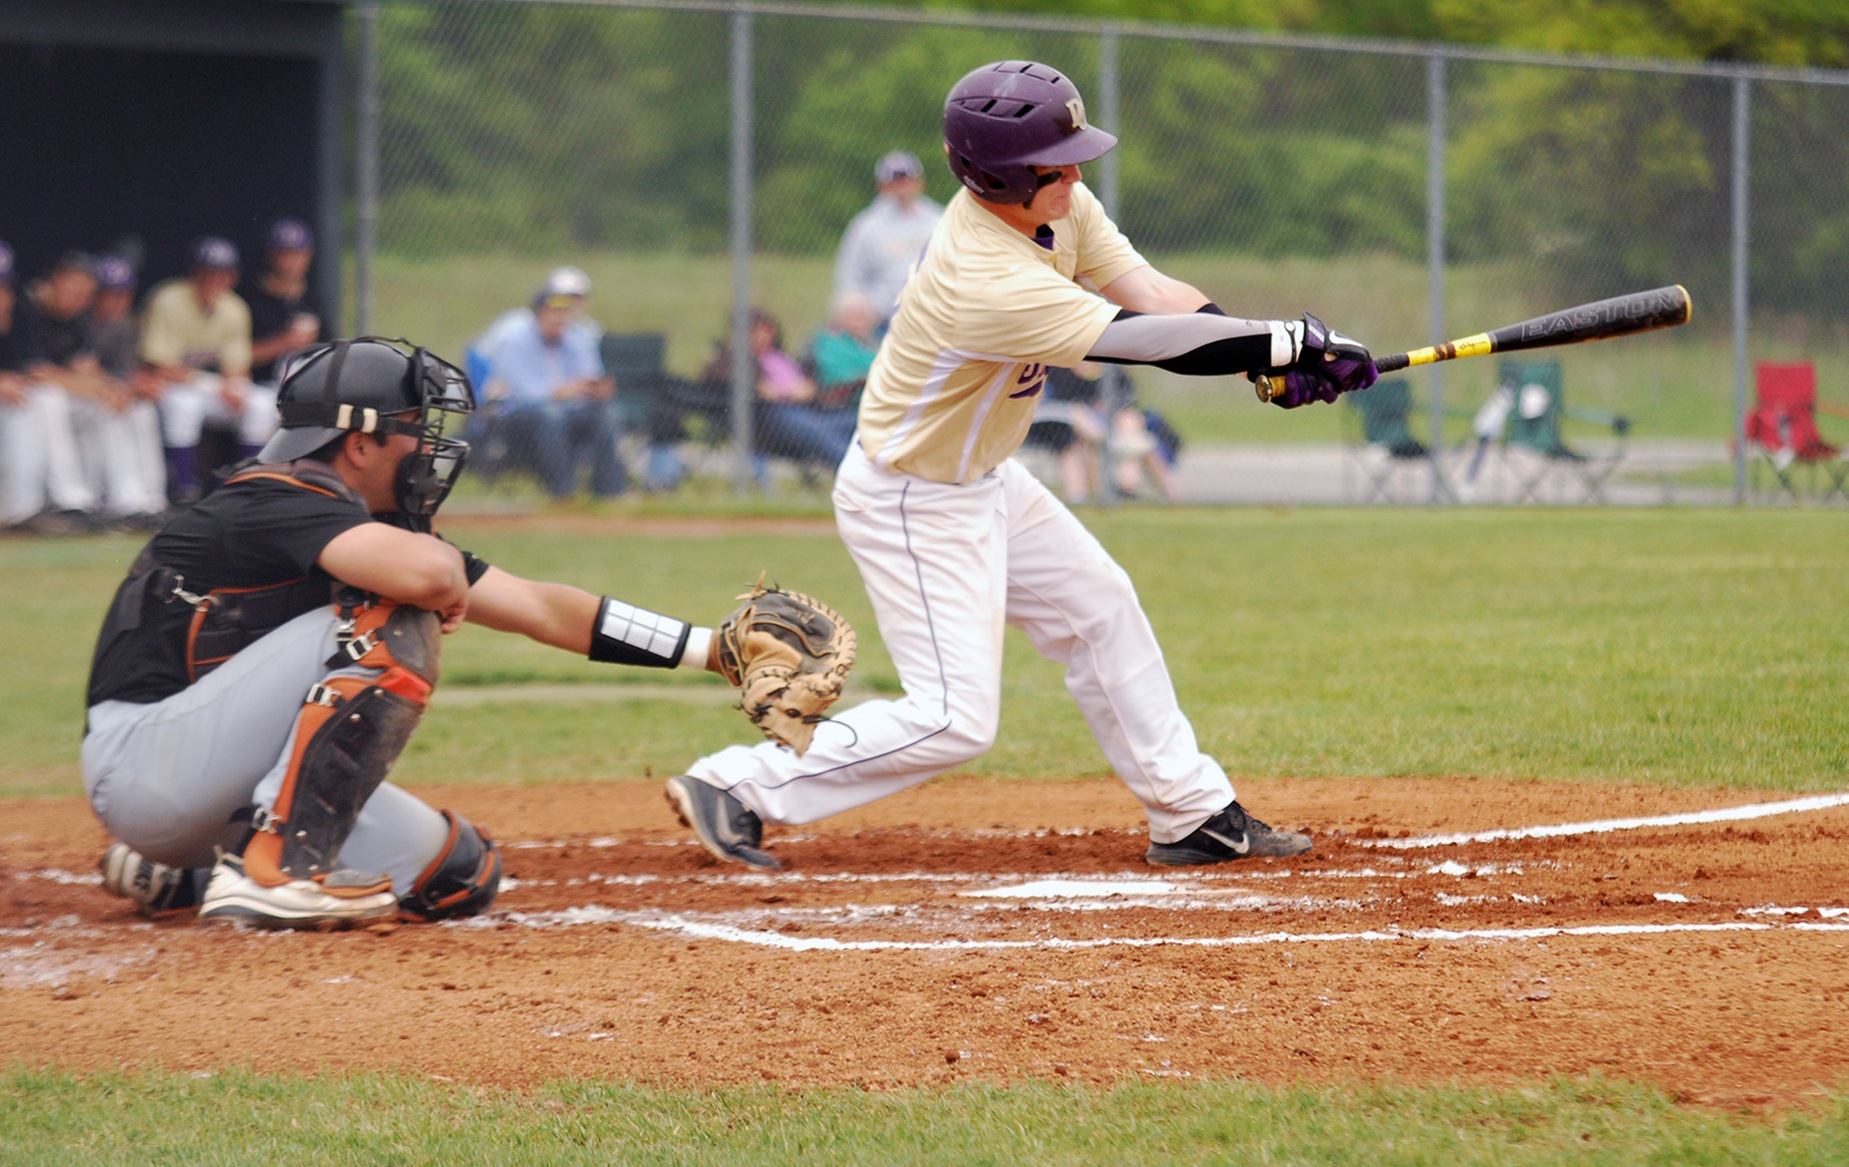 Donese Drives Home Three in Loss to Heidelberg